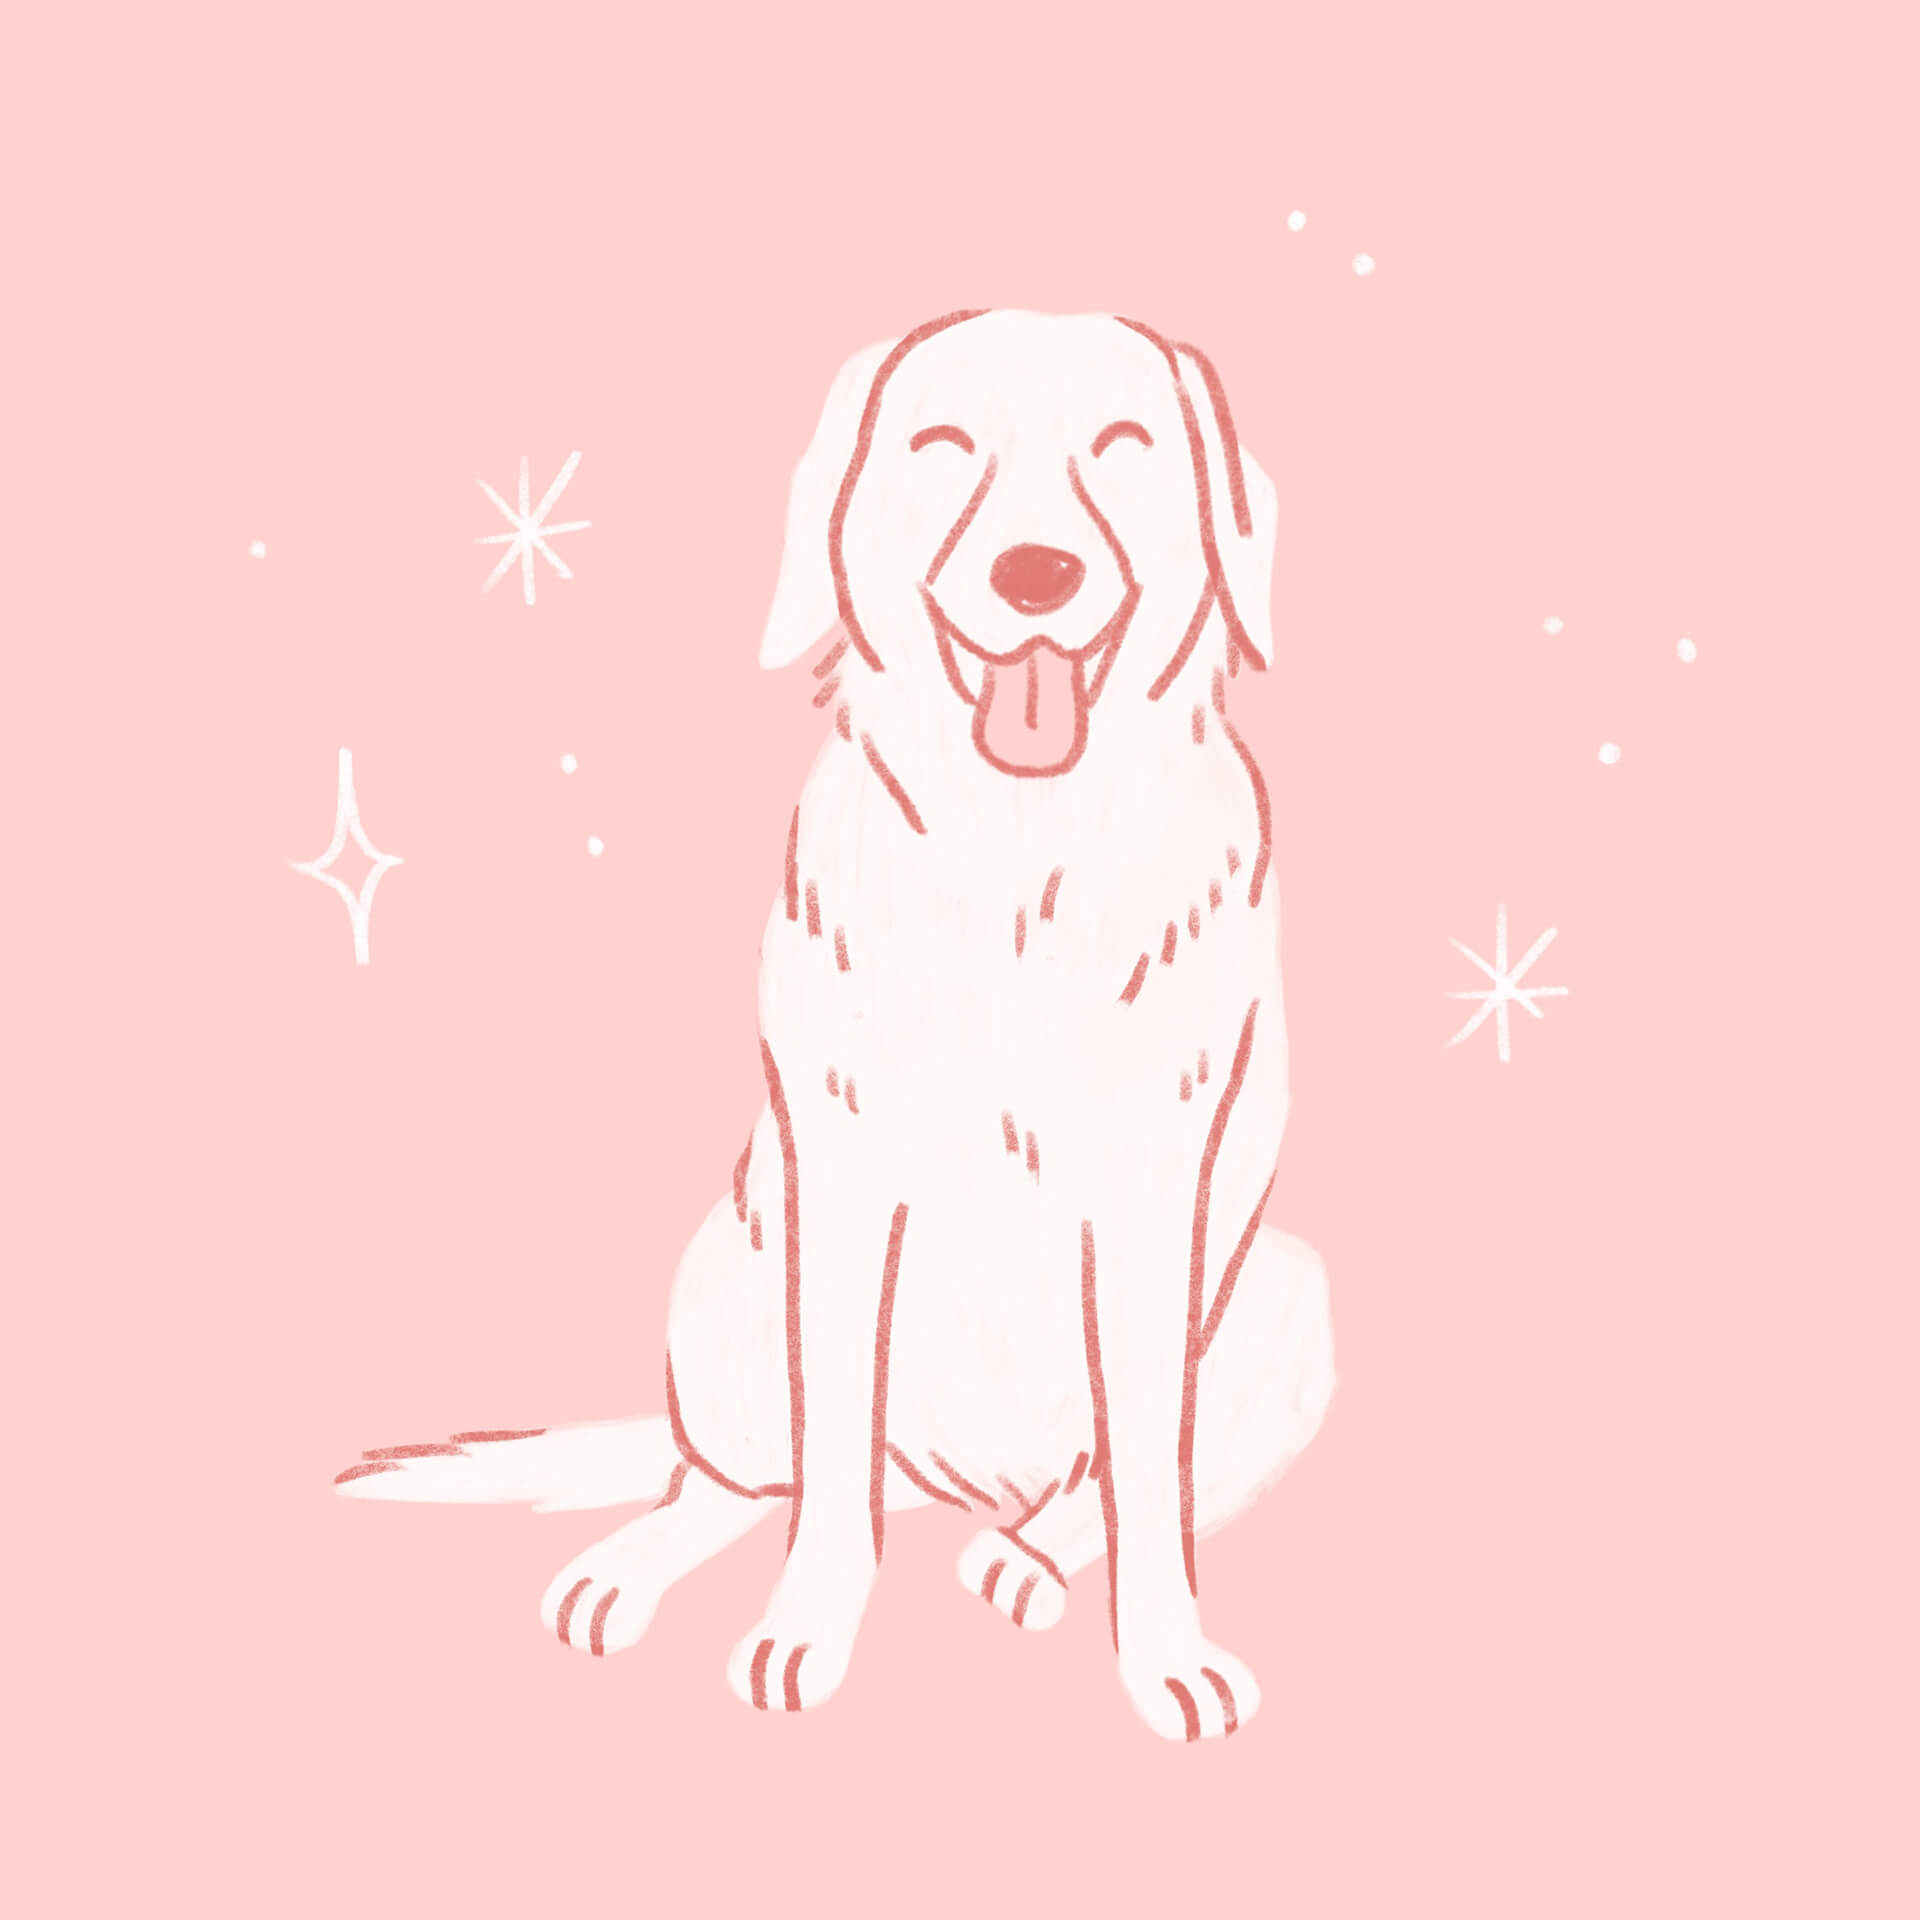 An illustration of a pink labrador sitting and smiling at the viewer